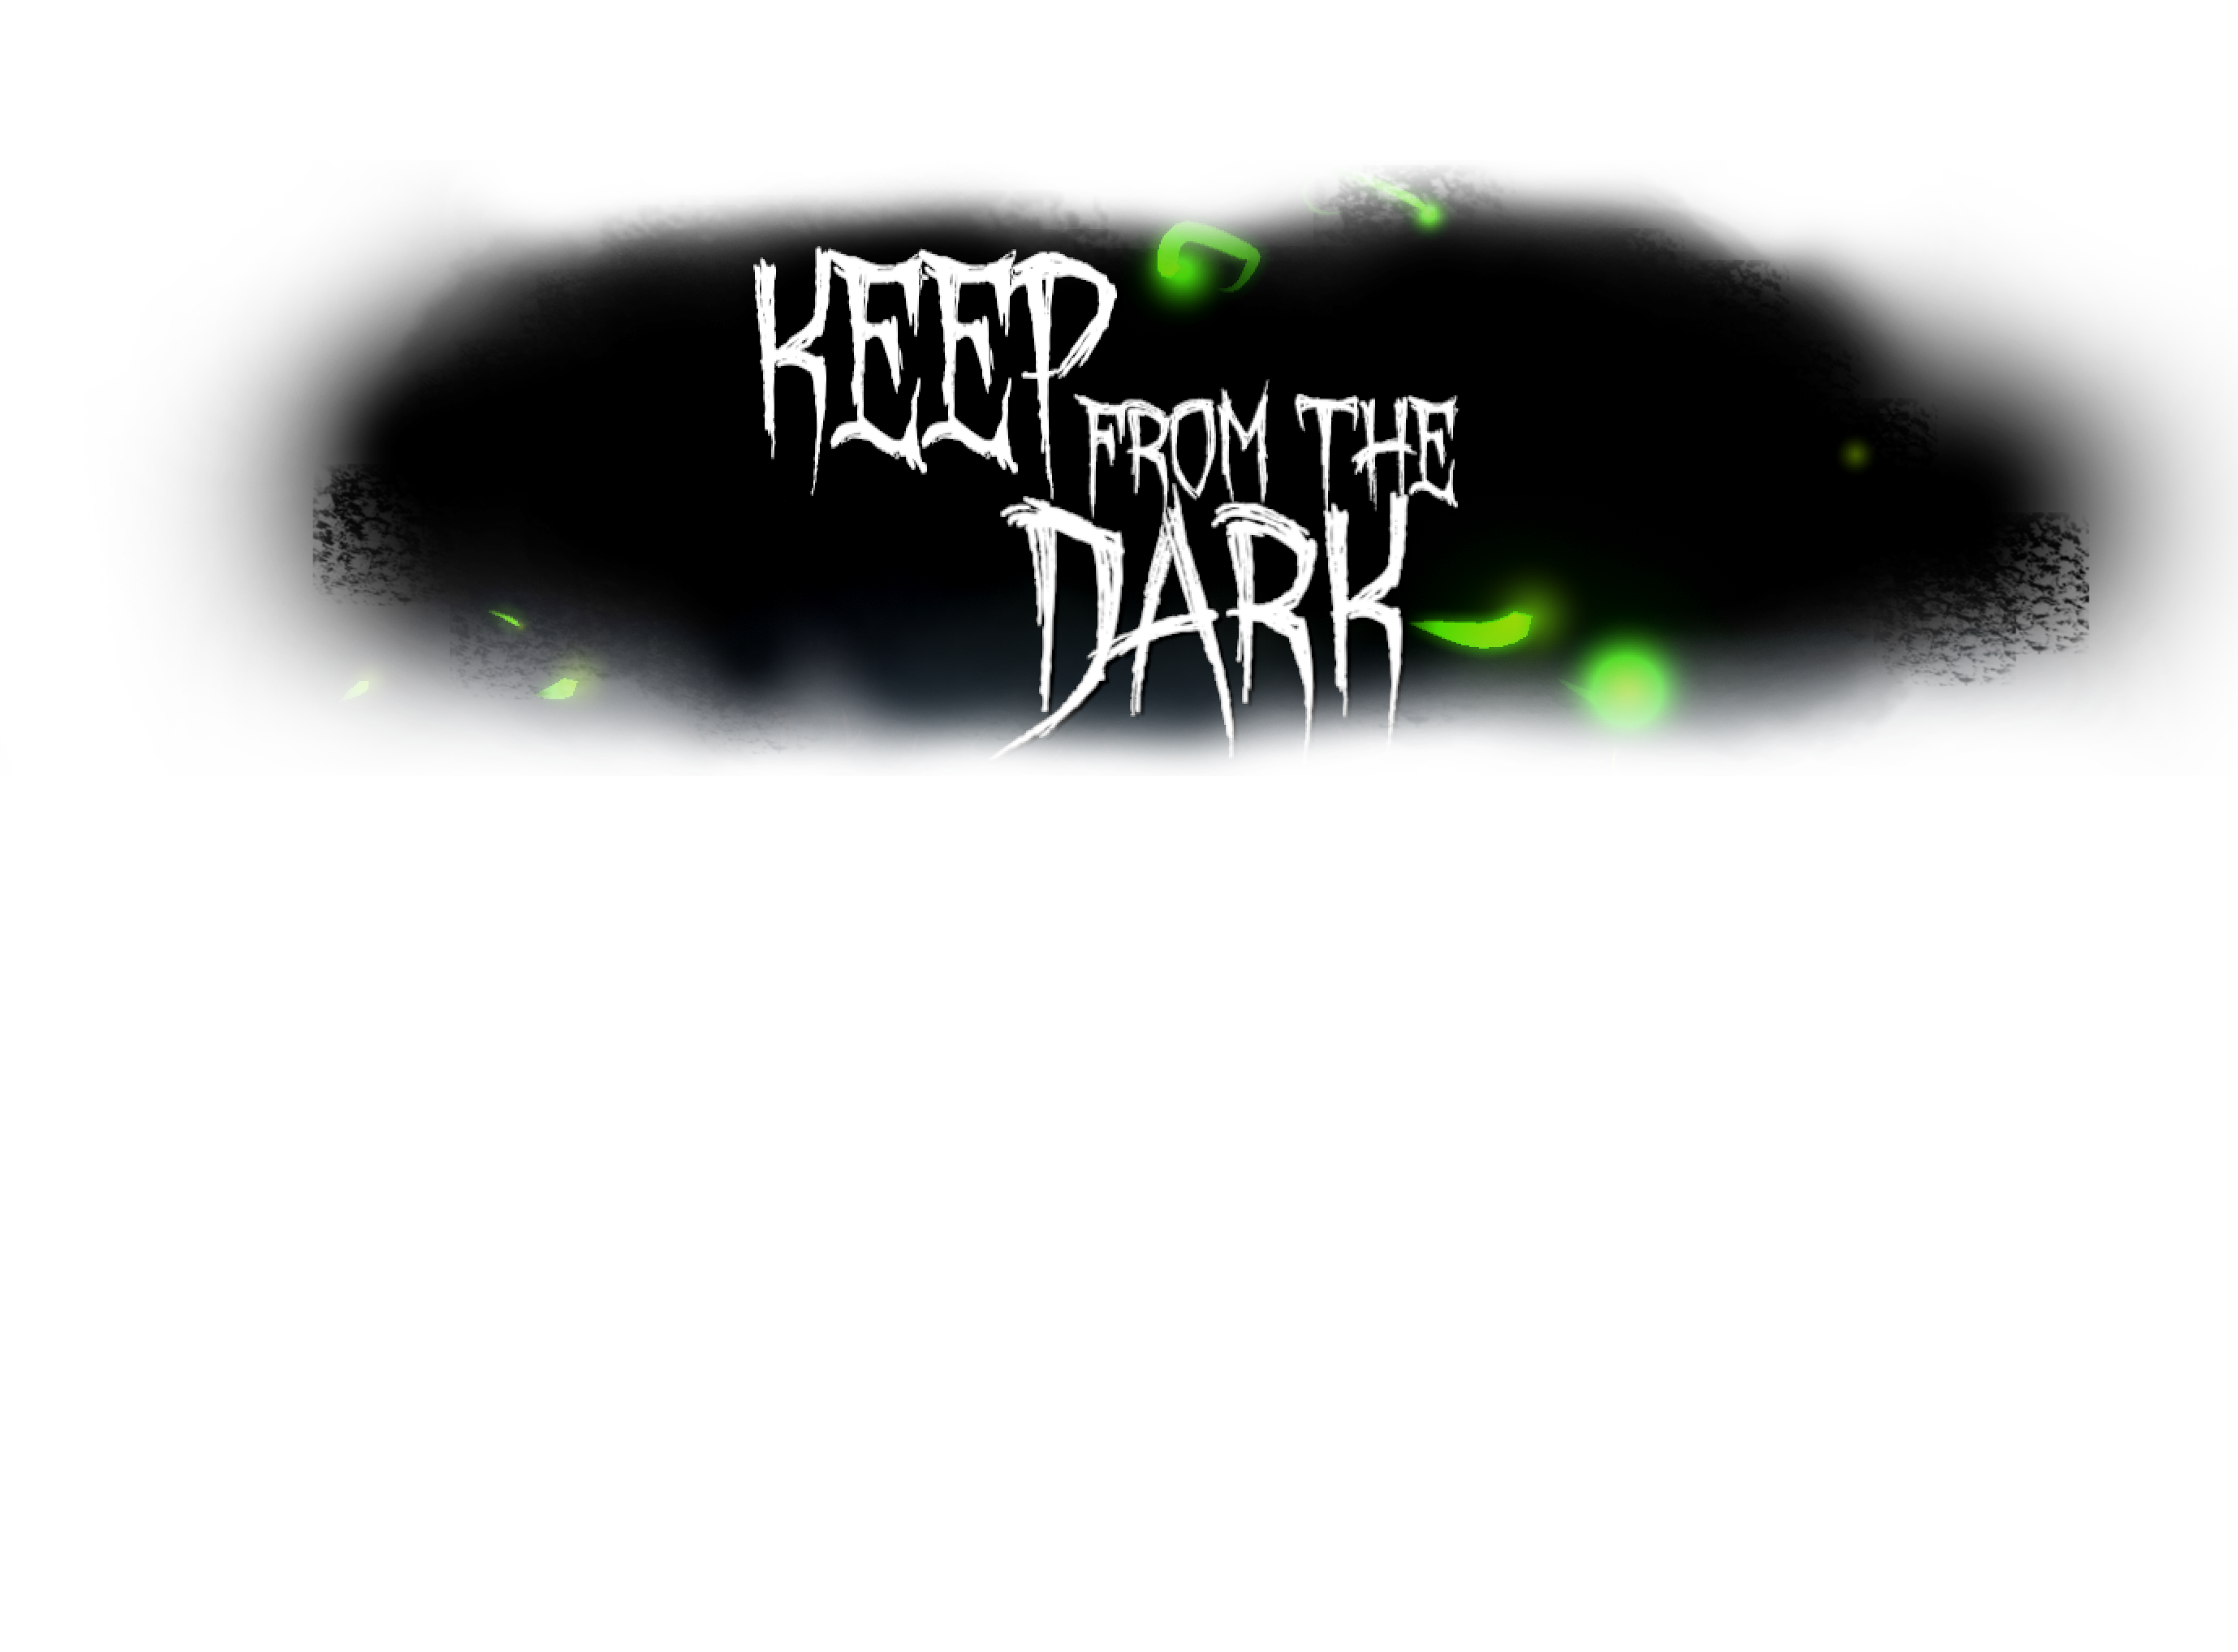 Keep From The Dark